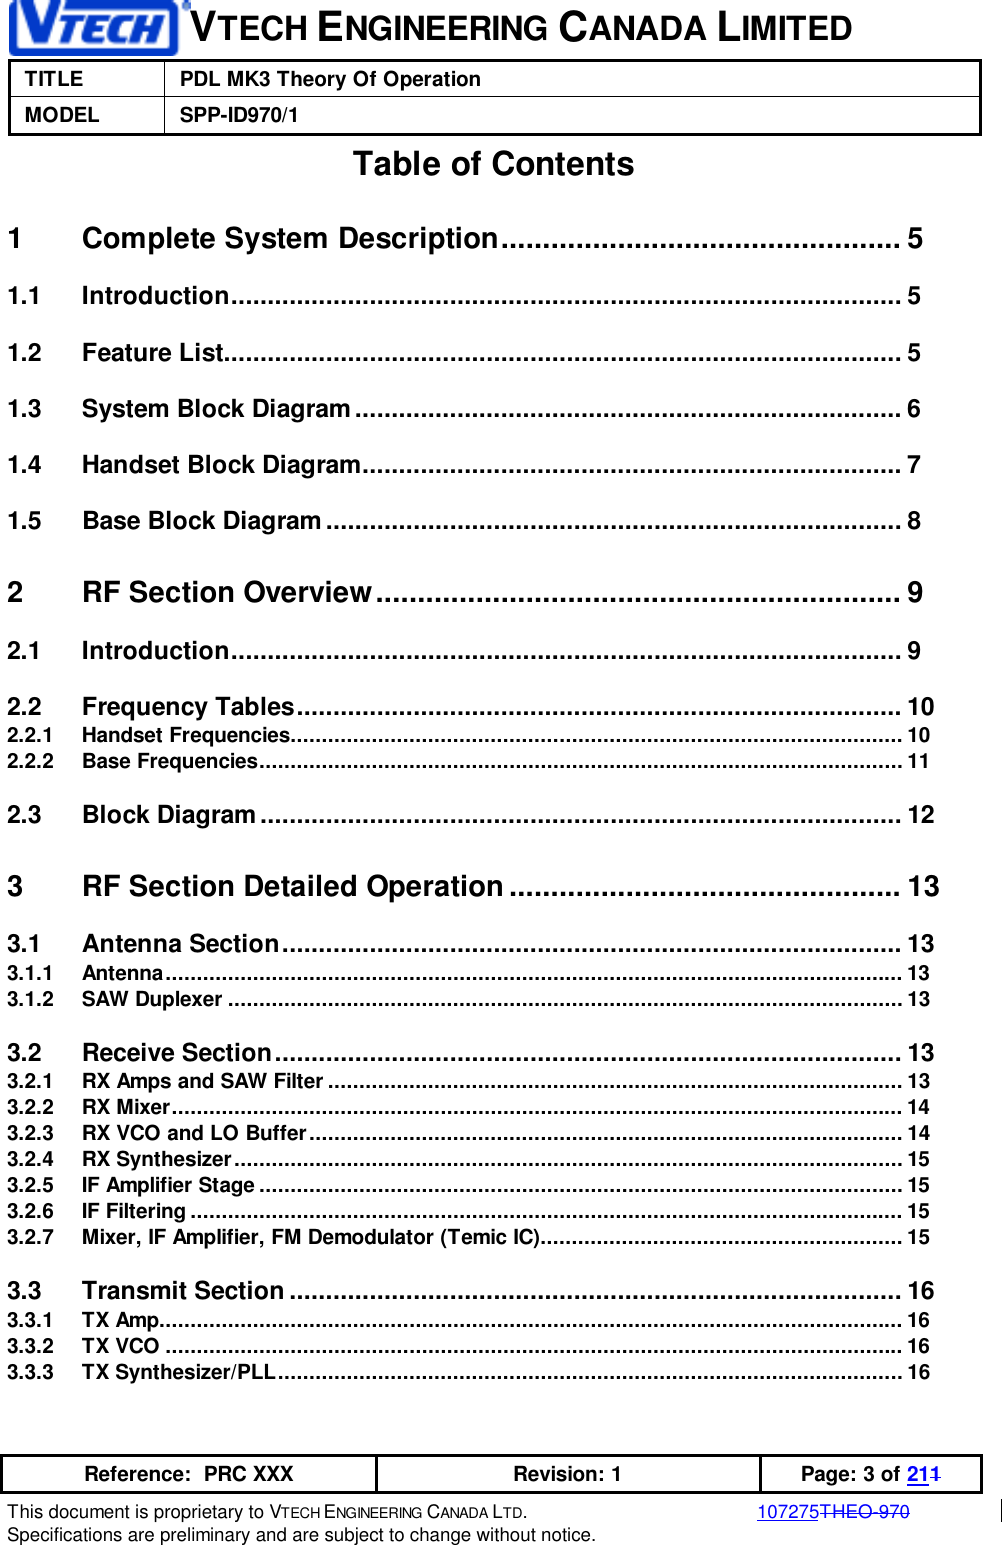 VTECH ENGINEERING CANADA LIMITEDTITLE PDL MK3 Theory Of OperationMODEL SPP-ID970/1Reference:  PRC XXX Revision: 1 Page: 3 of 211This document is proprietary to VTECH ENGINEERING CANADA LTD.107275THEO-970Specifications are preliminary and are subject to change without notice.Table of Contents1 Complete System Description................................................ 51.1 Introduction............................................................................................ 51.2 Feature List............................................................................................. 51.3 System Block Diagram........................................................................... 61.4 Handset Block Diagram.......................................................................... 71.5 Base Block Diagram ............................................................................... 82 RF Section Overview............................................................... 92.1 Introduction............................................................................................ 92.2 Frequency Tables................................................................................... 102.2.1 Handset Frequencies.................................................................................................. 102.2.2 Base Frequencies....................................................................................................... 112.3 Block Diagram........................................................................................ 123 RF Section Detailed Operation............................................... 133.1 Antenna Section..................................................................................... 133.1.1 Antenna...................................................................................................................... 133.1.2 SAW Duplexer ............................................................................................................ 133.2 Receive Section...................................................................................... 133.2.1 RX Amps and SAW Filter ............................................................................................ 133.2.2 RX Mixer..................................................................................................................... 143.2.3 RX VCO and LO Buffer............................................................................................... 143.2.4 RX Synthesizer........................................................................................................... 153.2.5 IF Amplifier Stage....................................................................................................... 153.2.6 IF Filtering.................................................................................................................. 153.2.7 Mixer, IF Amplifier, FM Demodulator (Temic IC).......................................................... 153.3 Transmit Section .................................................................................... 163.3.1 TX Amp....................................................................................................................... 163.3.2 TX VCO ...................................................................................................................... 163.3.3 TX Synthesizer/PLL.................................................................................................... 16